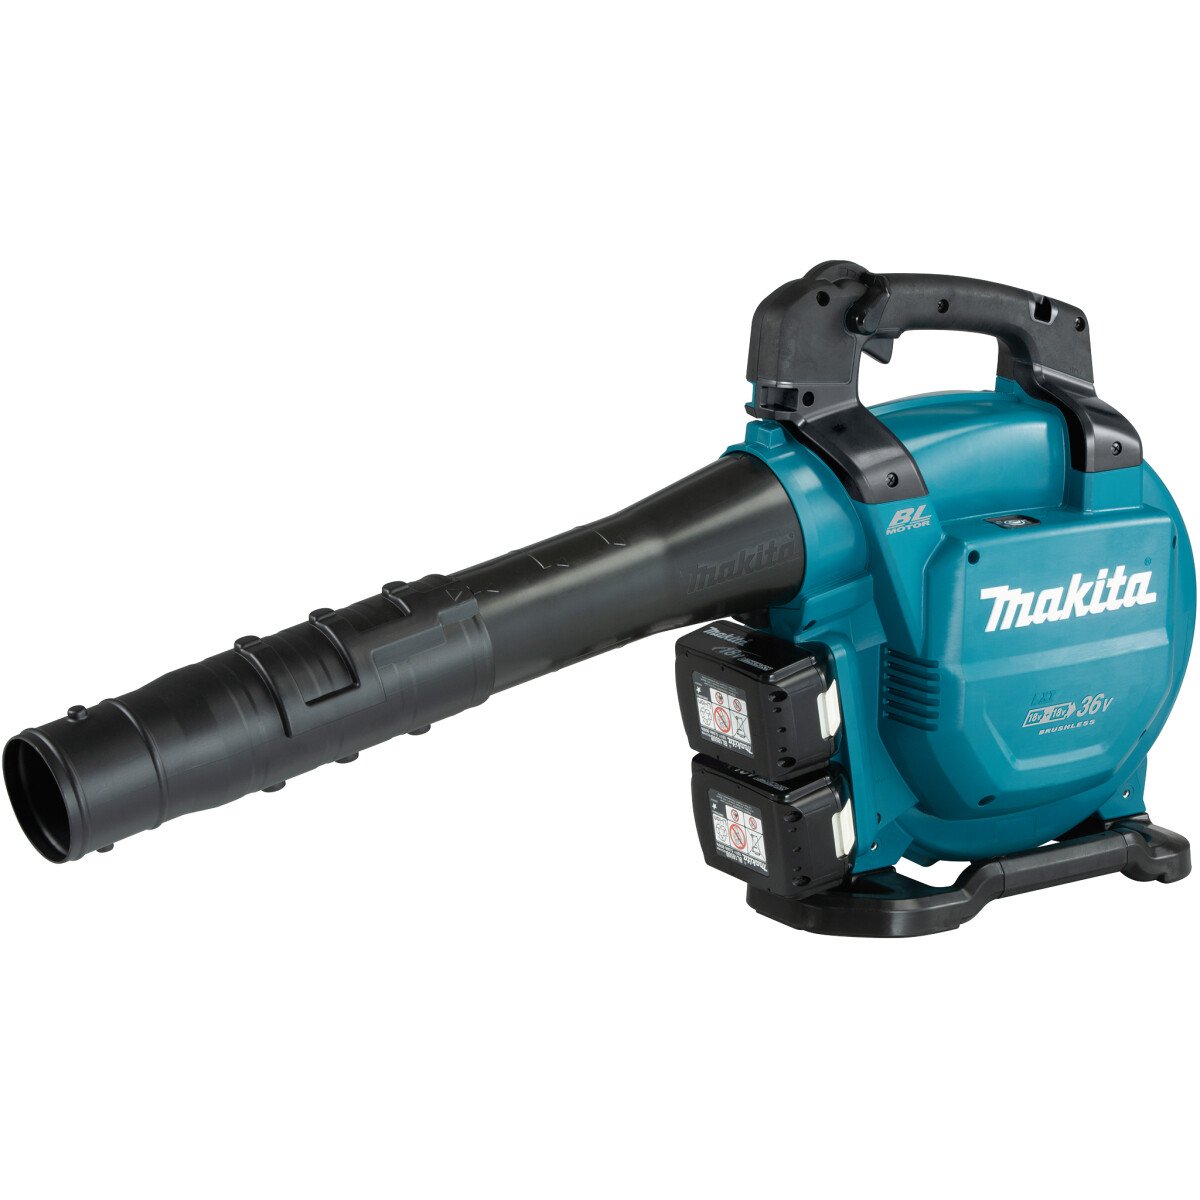 Makita DUB363PG2V Twin 18V LXT Blower with Vacuum Function, 2x 6.0Ah Batteries and Charger